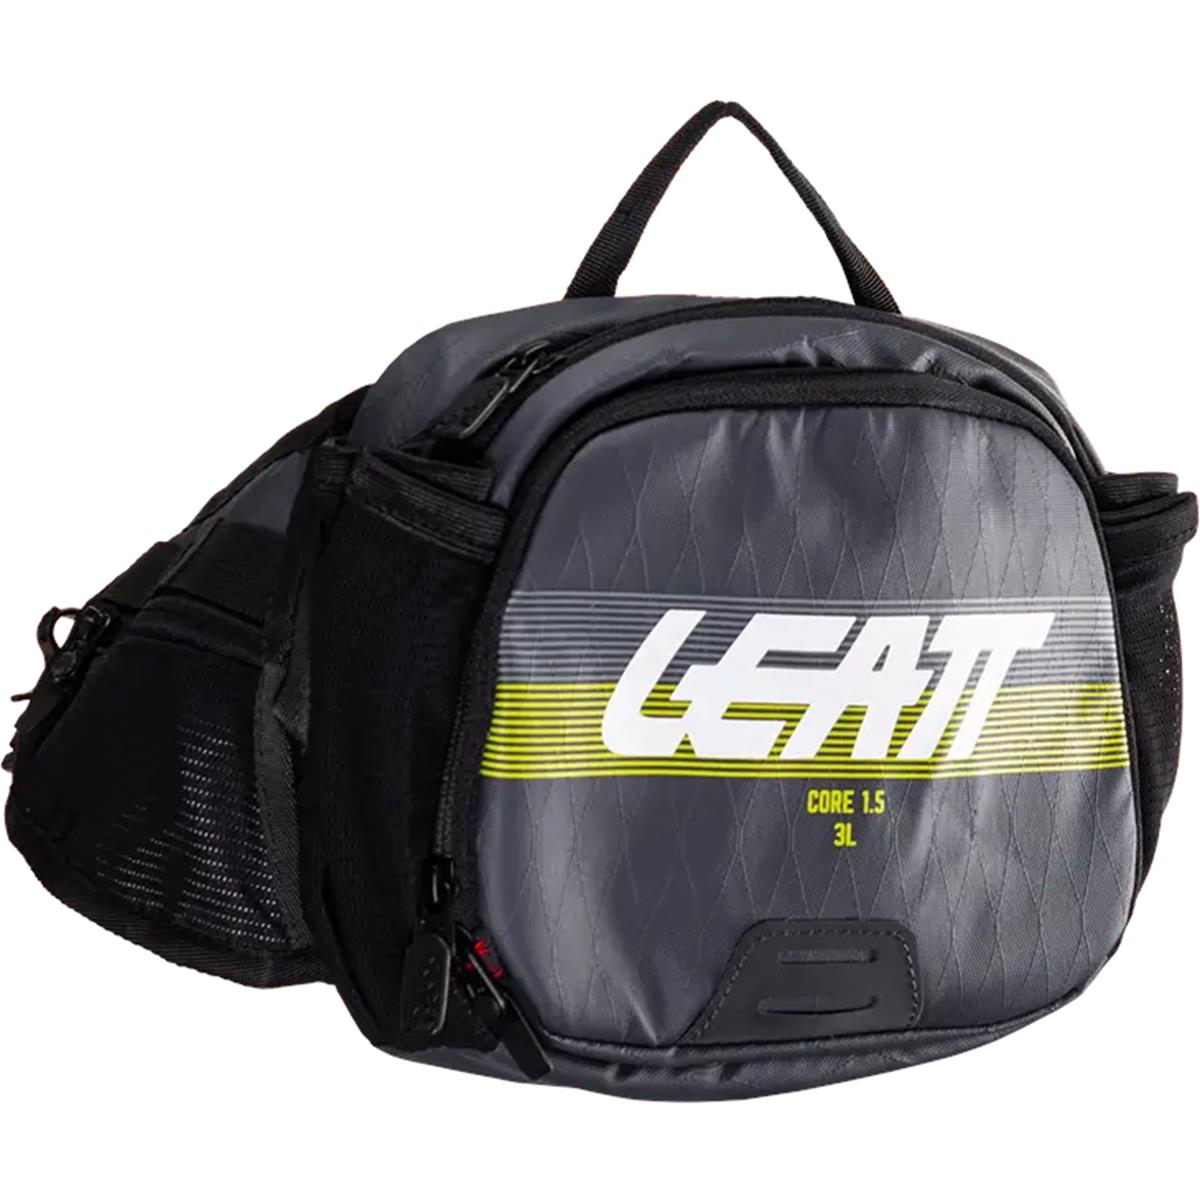 Leatt Hip Pack with Hydration System 1.5 Liters Hydration Core 1.5 Lime